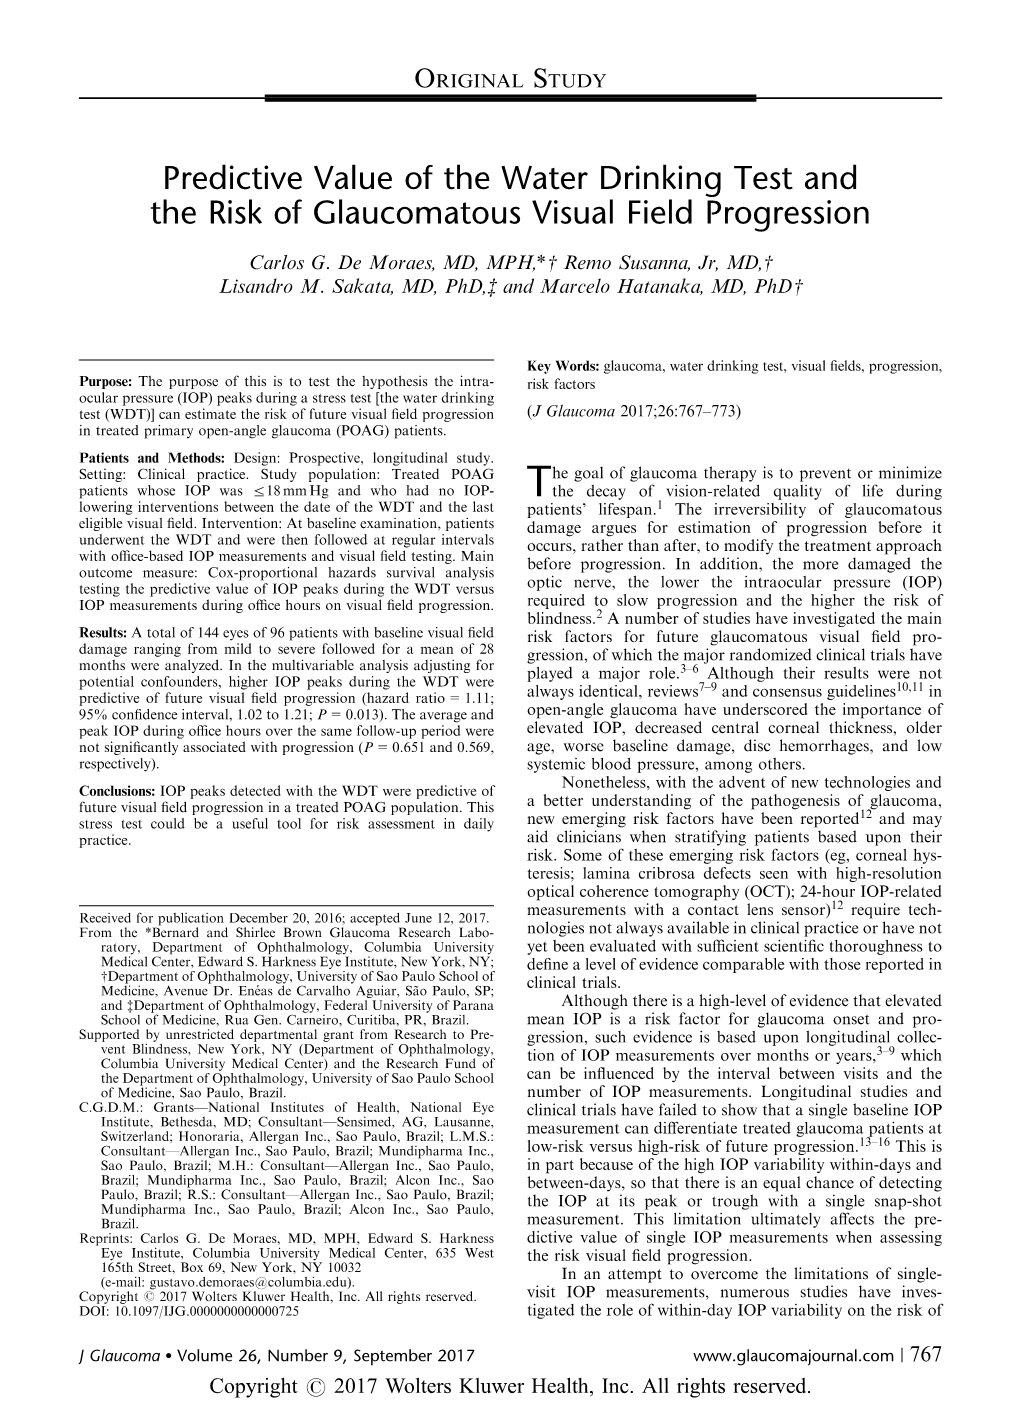 Predictive Value of the Water Drinking Test and the Risk of Glaucomatous Visual Field Progression